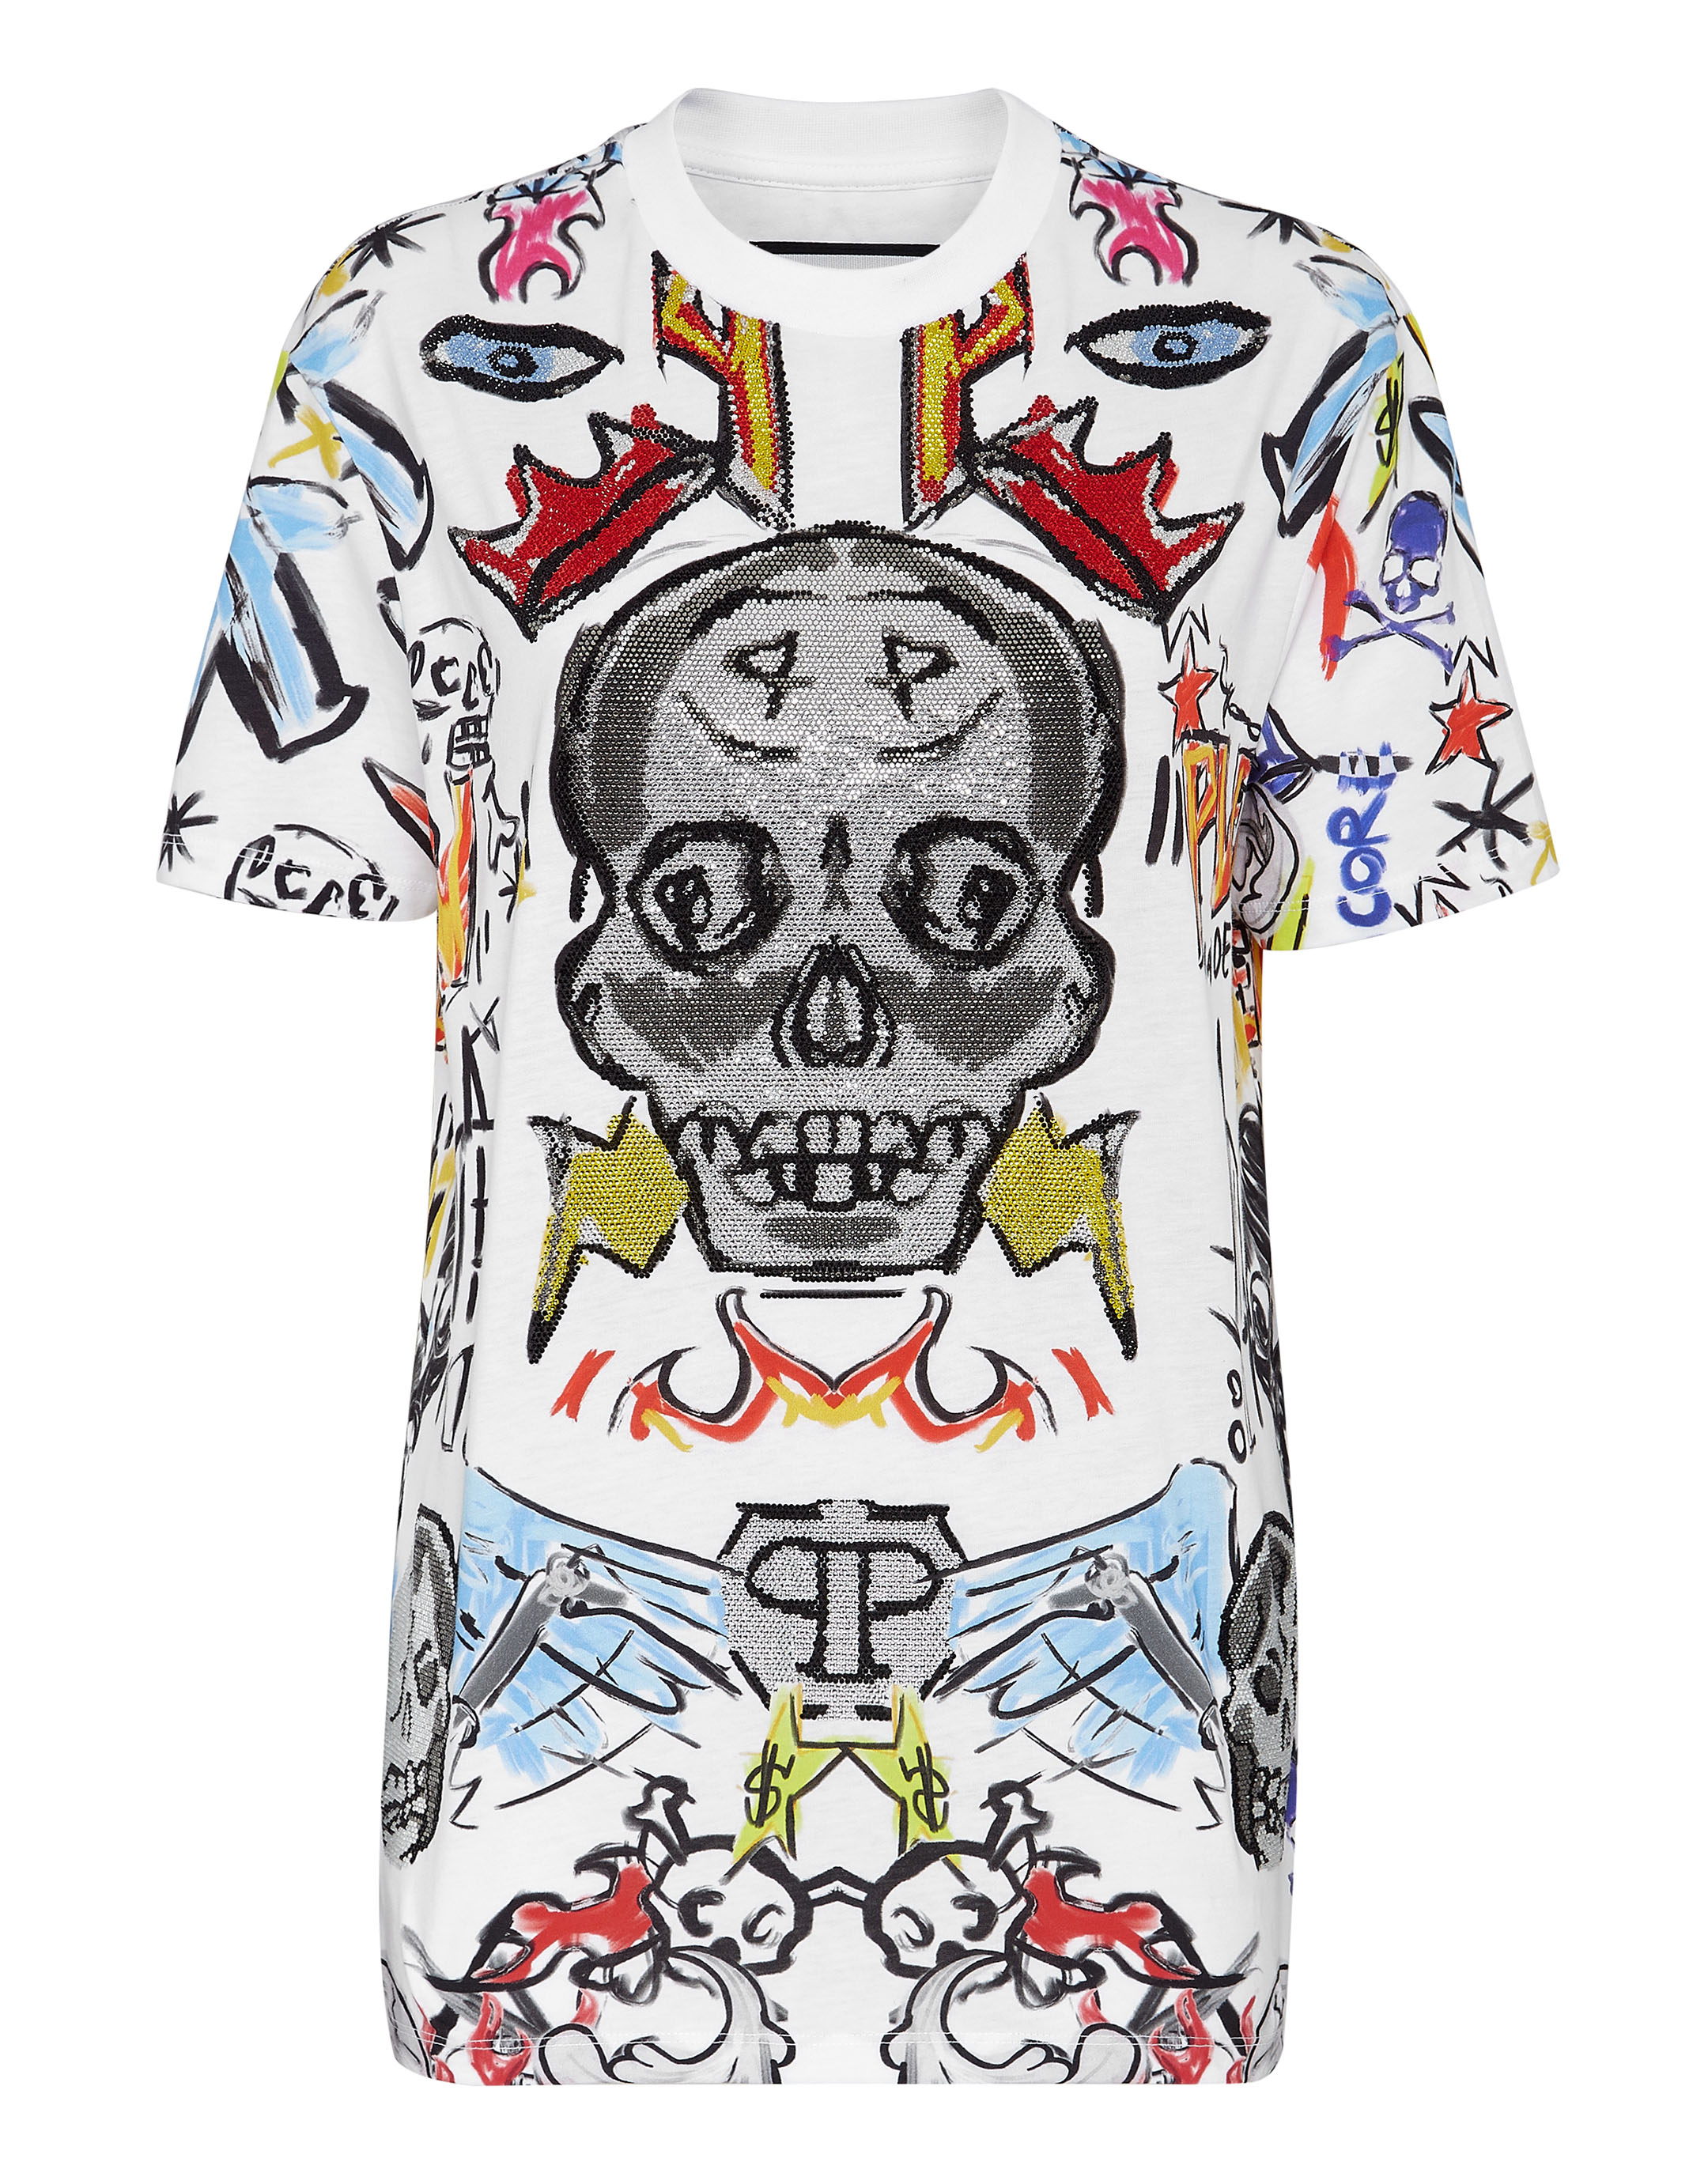 T-shirt Man Fit with Crystals | Philipp Plein Outlet